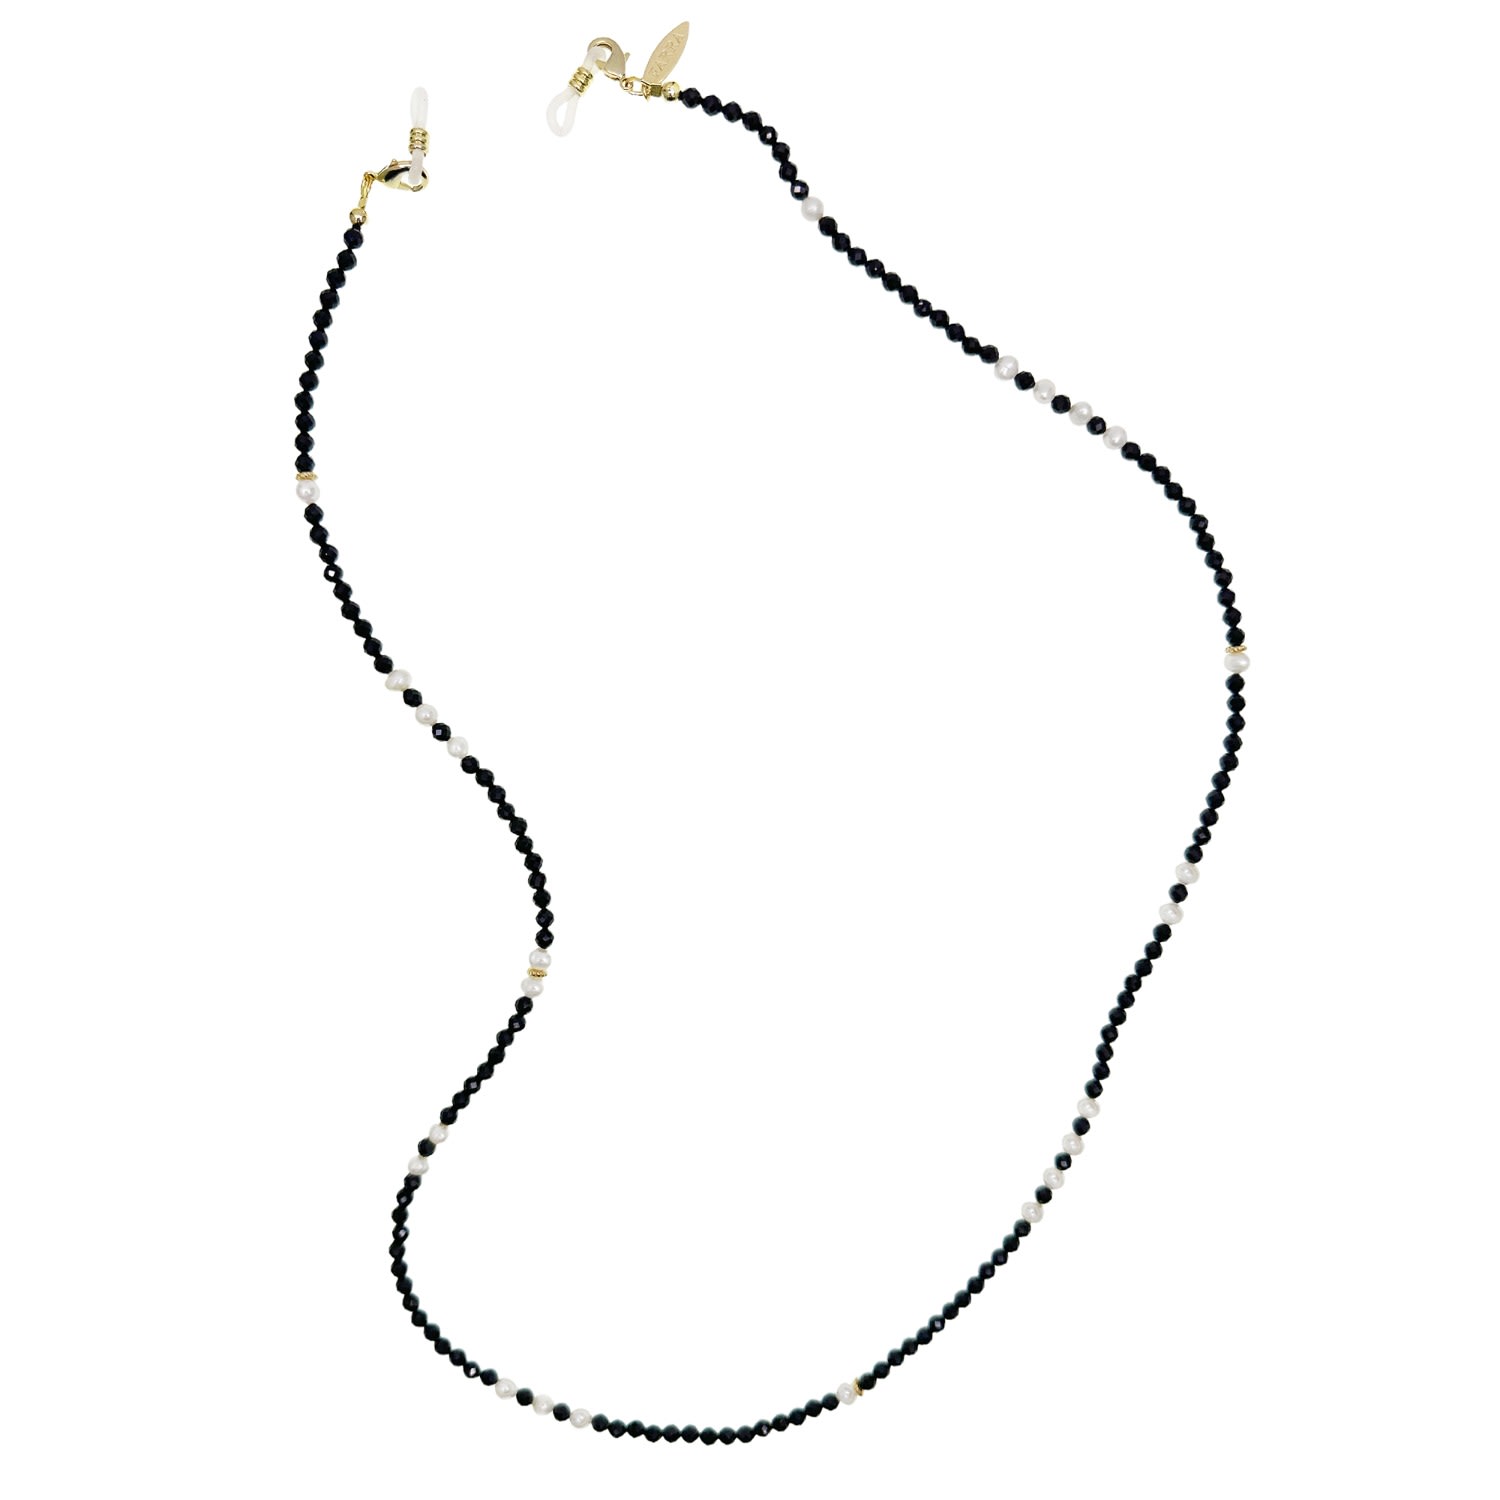 Farra Women's Black Spinel And Freshwater Pearls Eye Glasses Chain